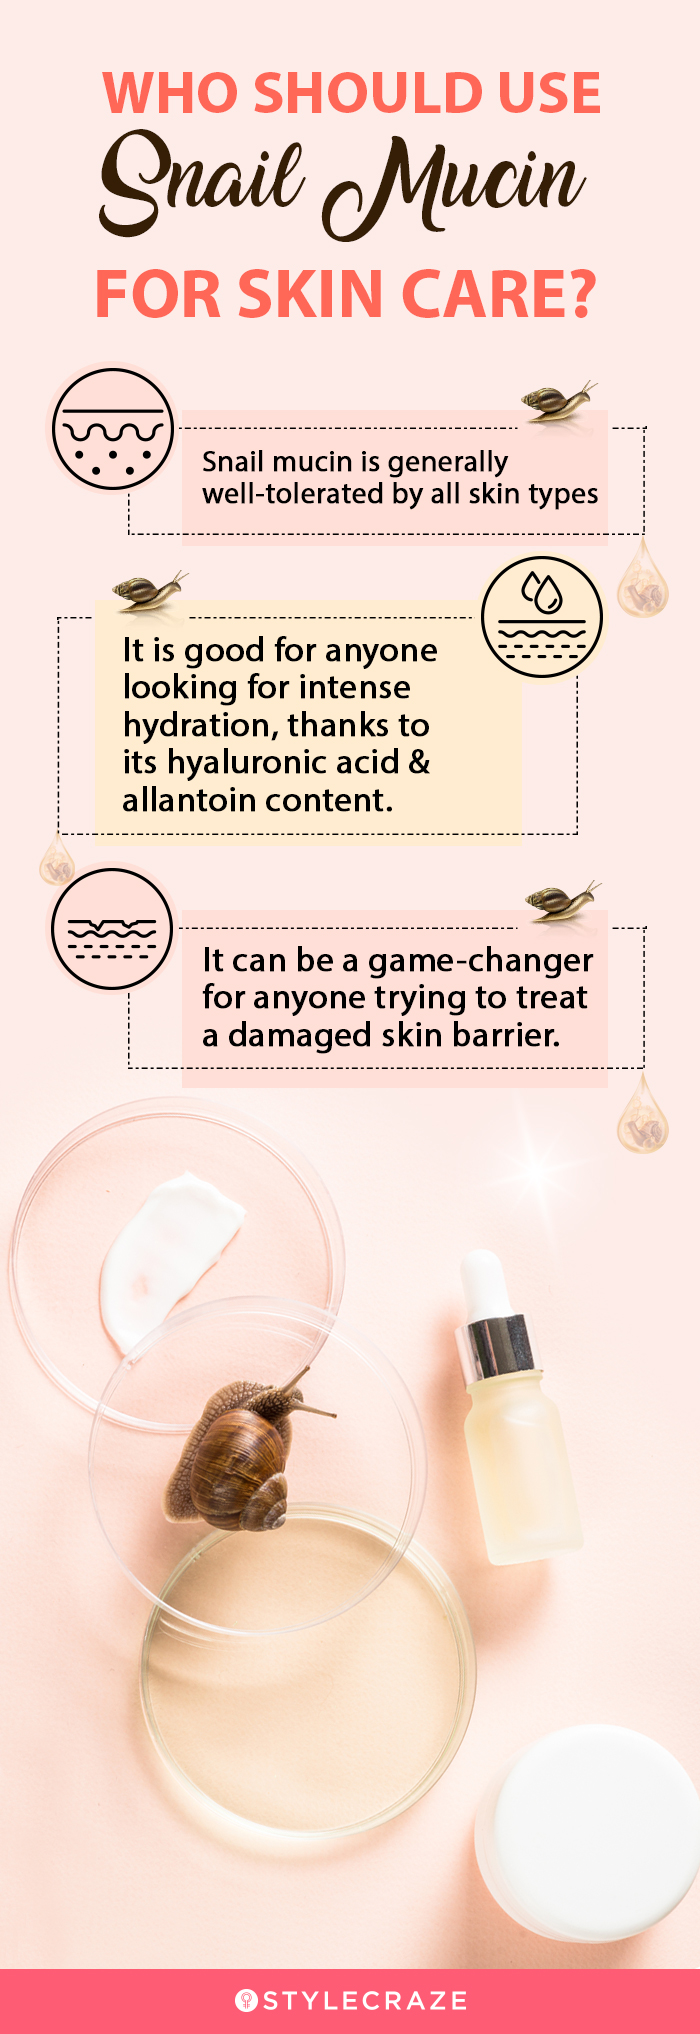 who should use snail mucin for skin care (infographic)